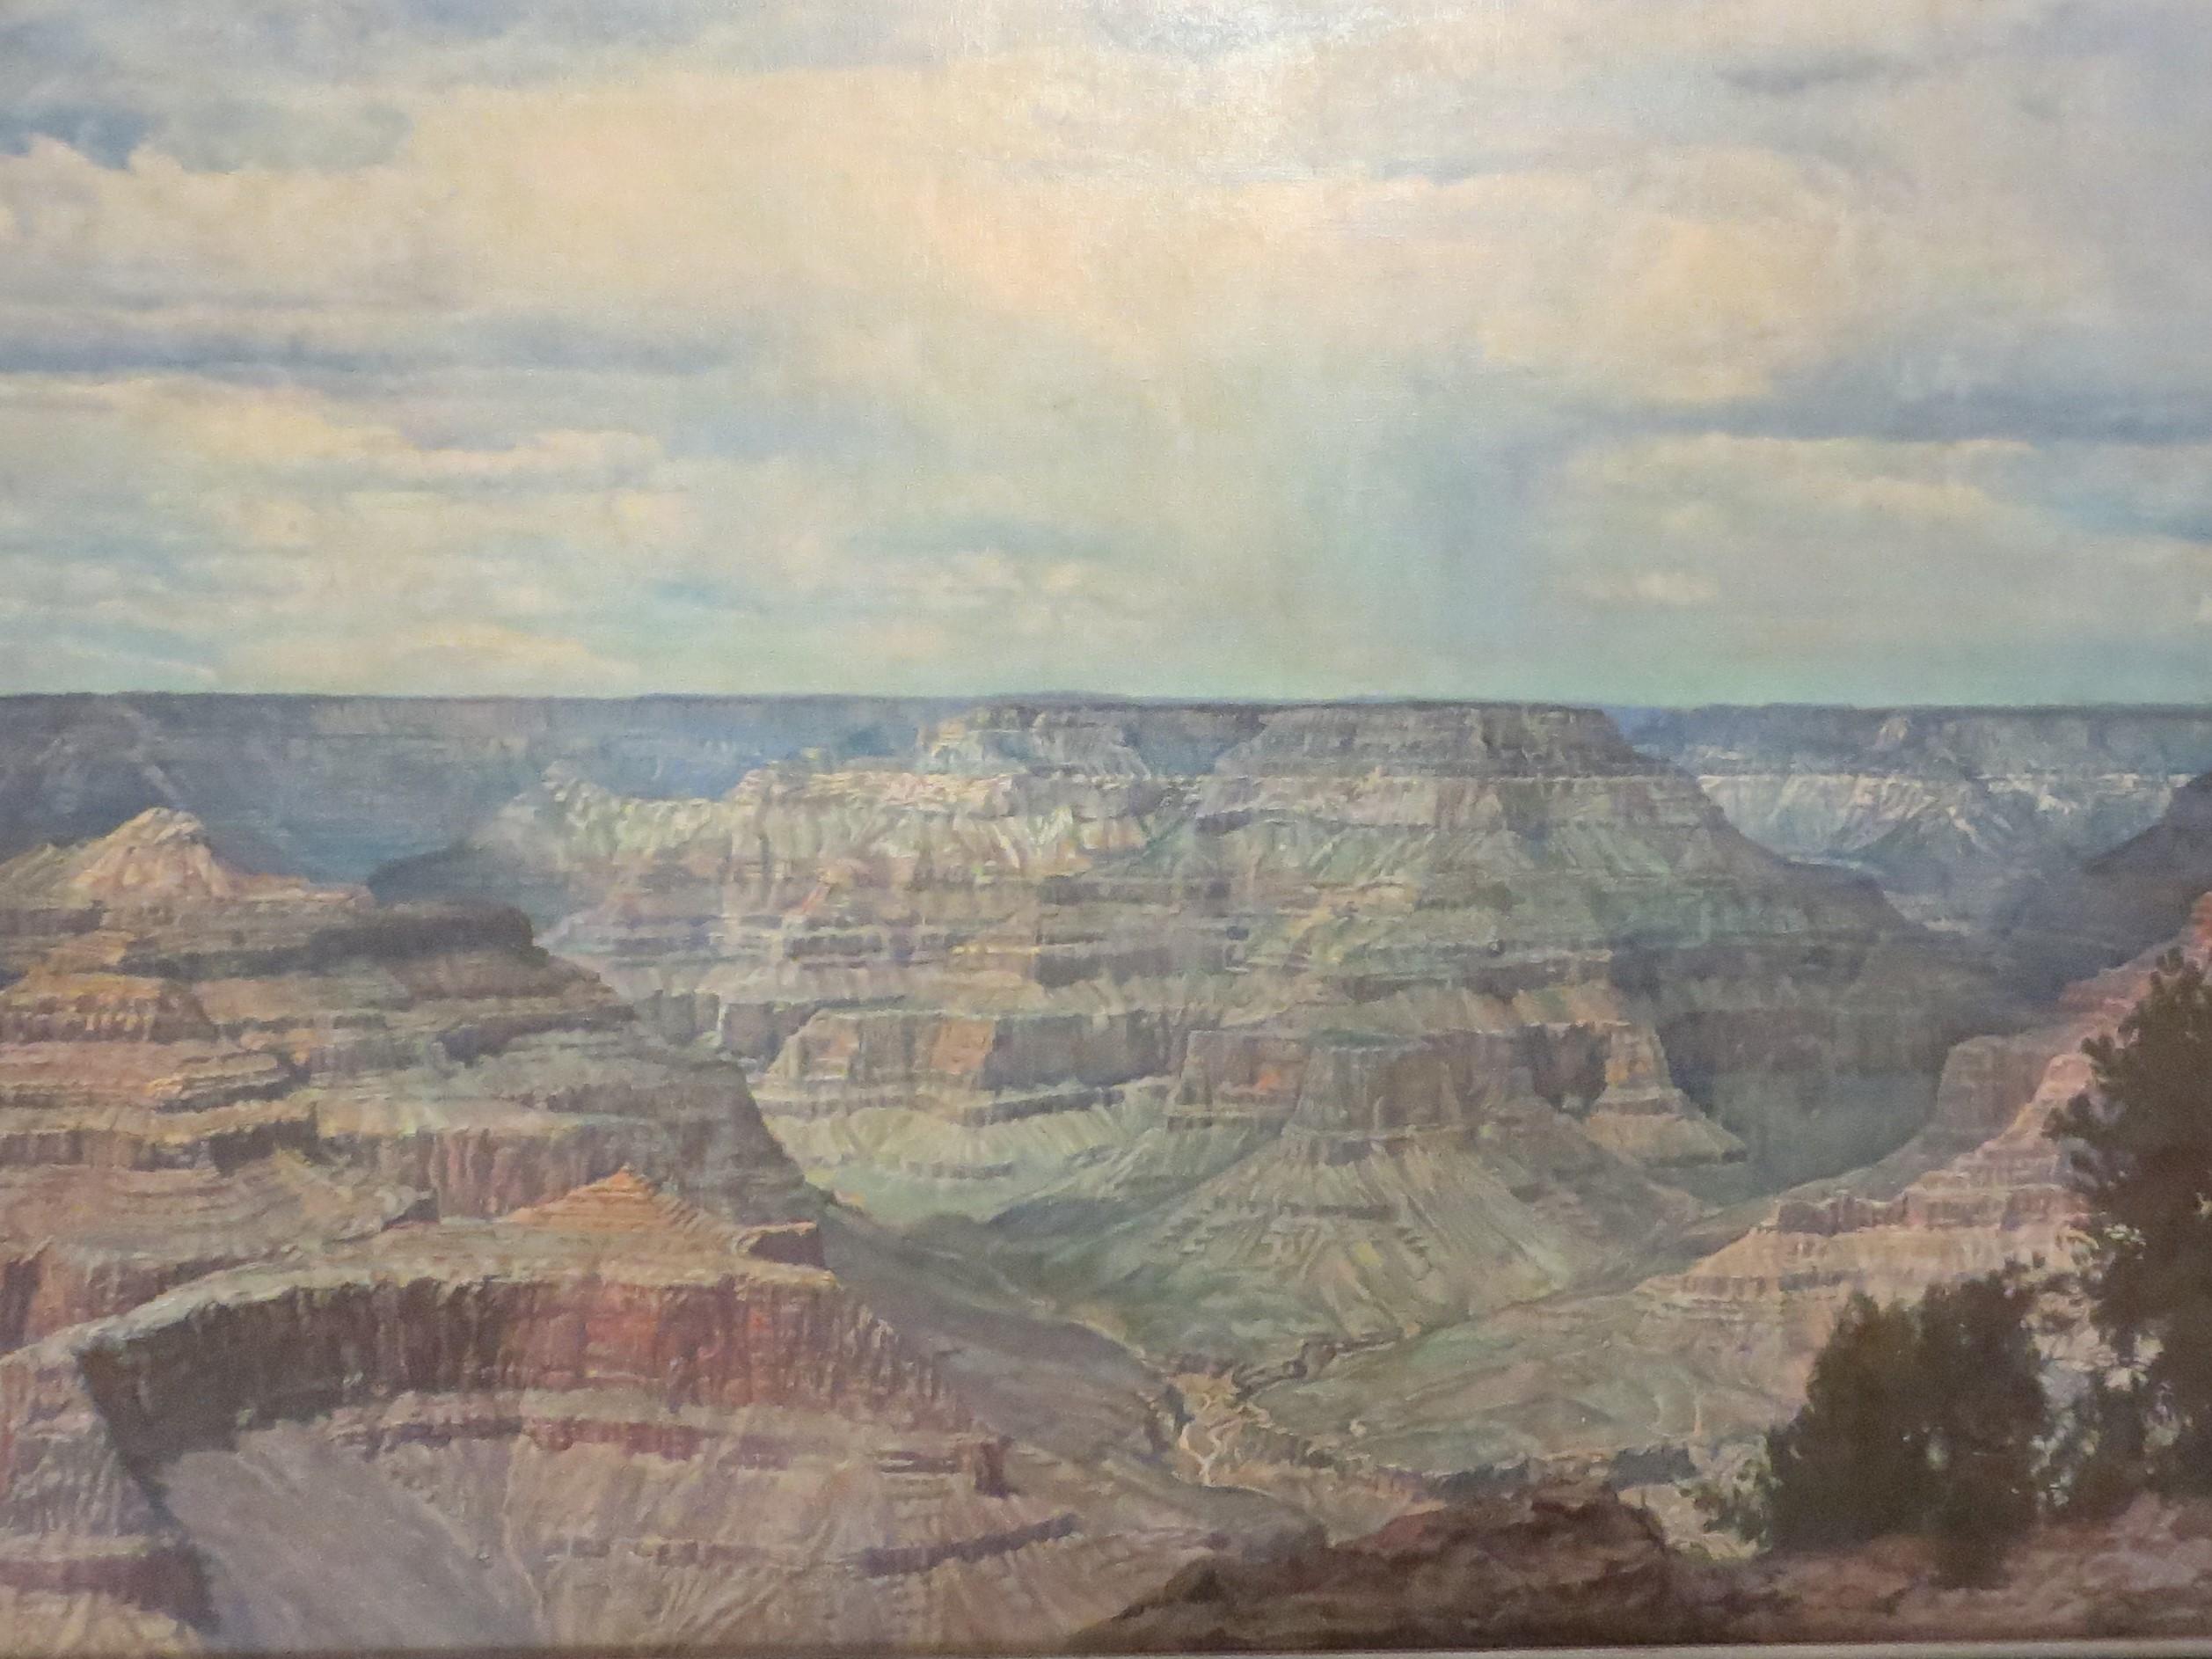 Albert Londraville  Landscape Painting - Grand Canyon view from Maricopa point 